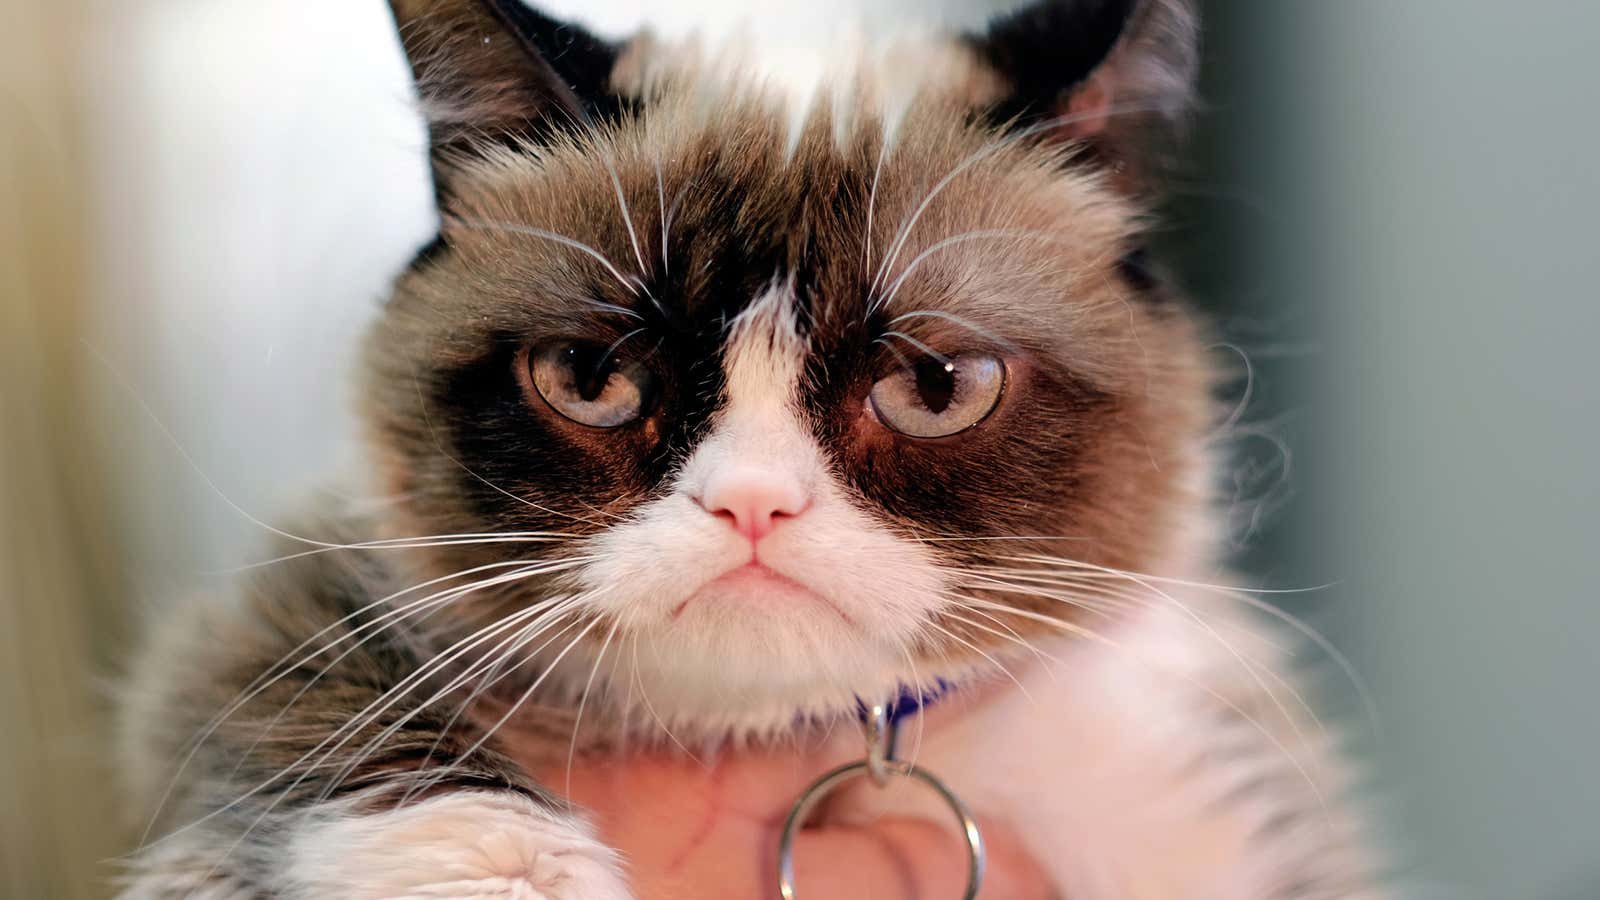 Tardar Sauce, commonly known as Grumpy Cat.